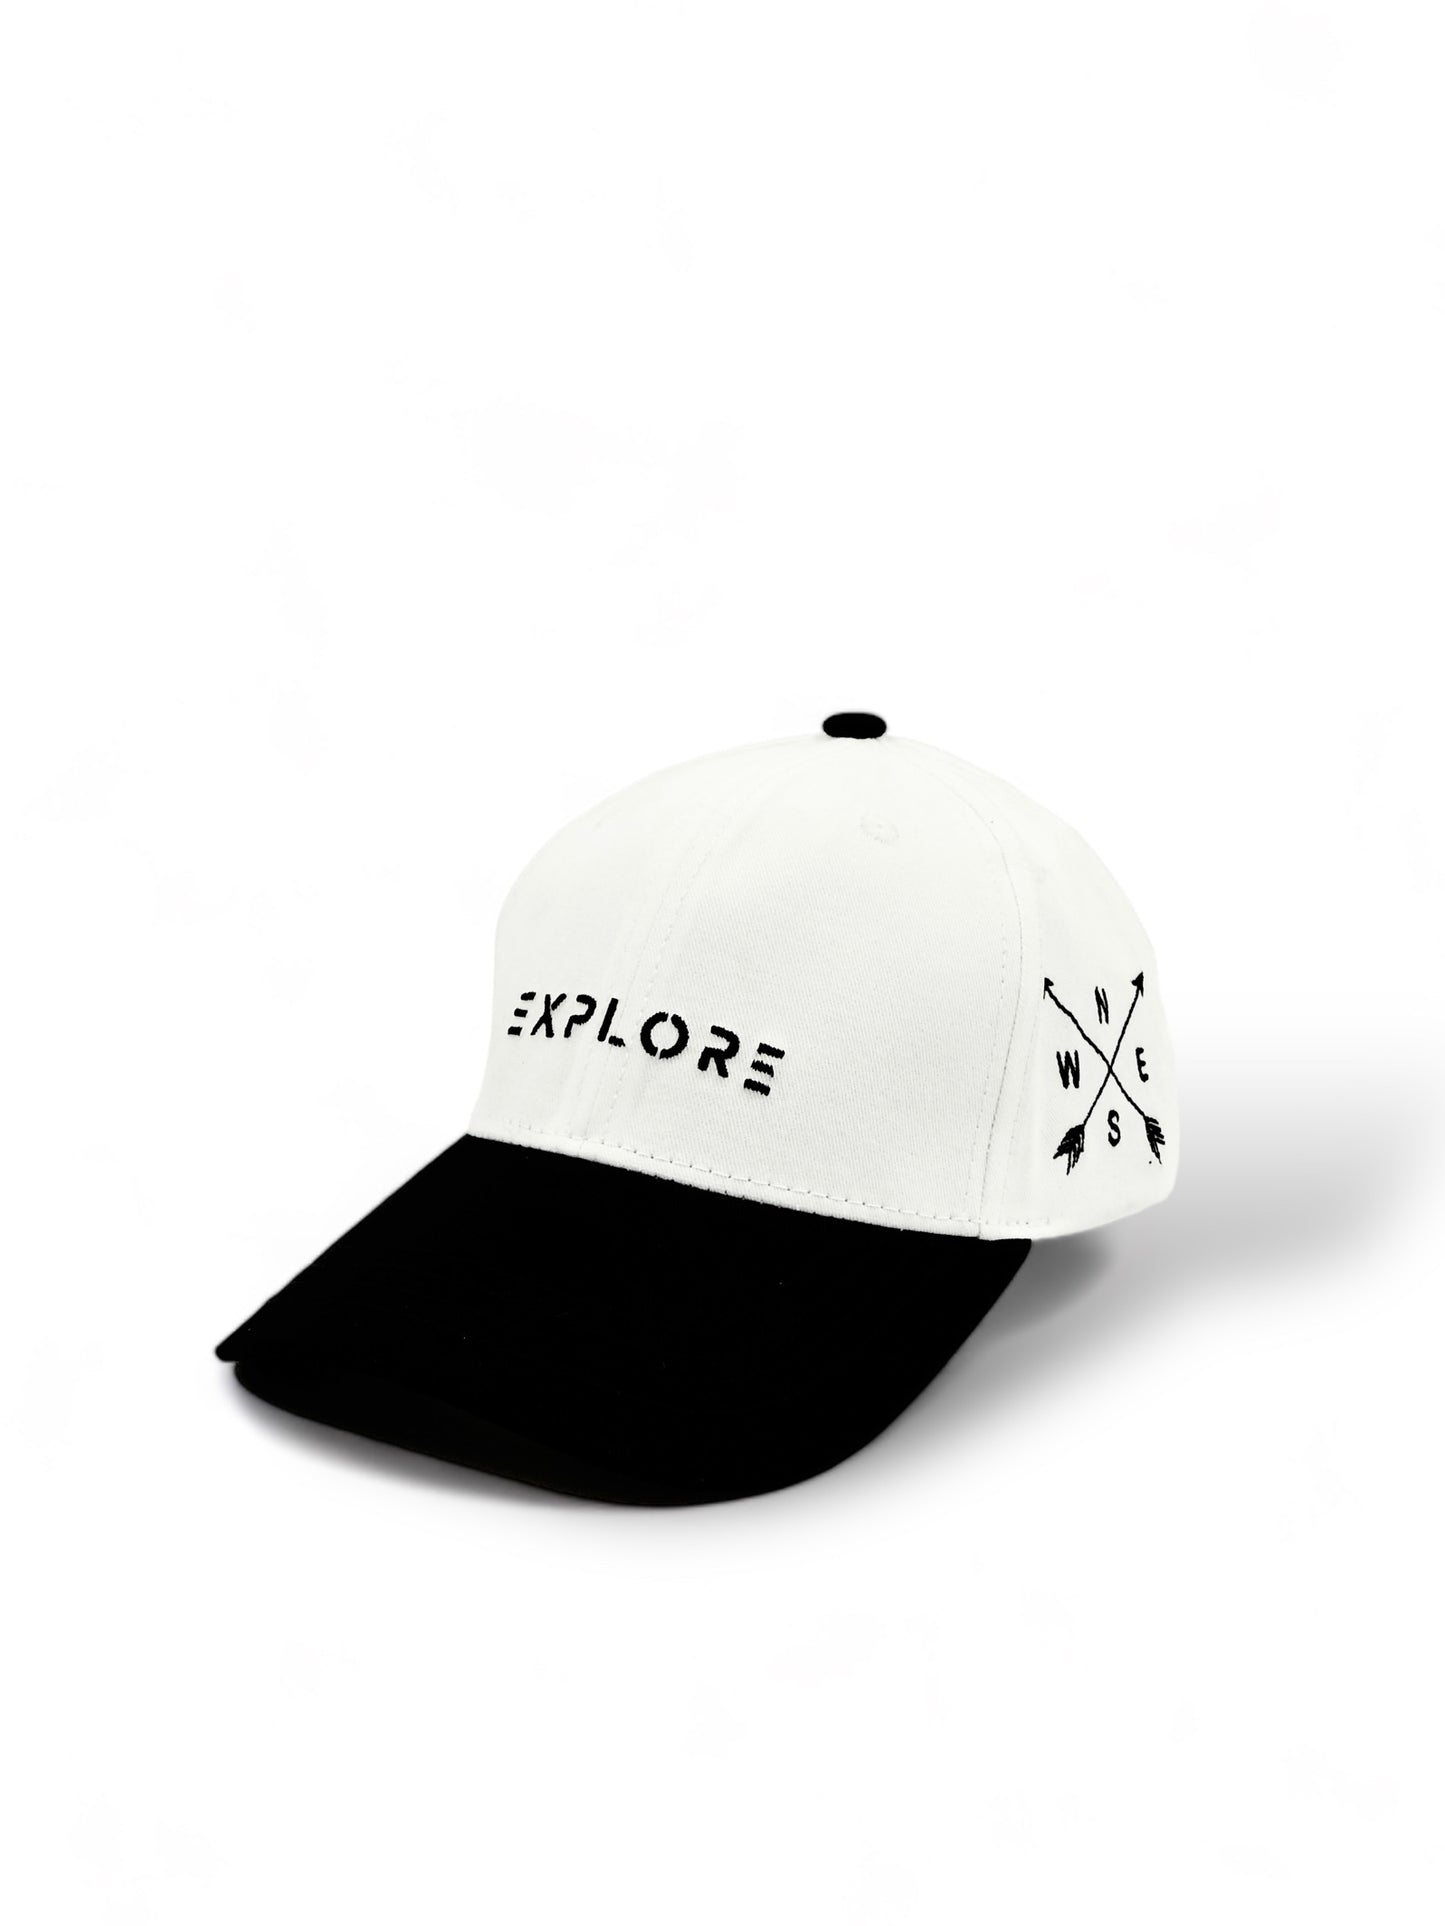 https://www.onewordstore.com/products/explore-cap-One Word Store ...